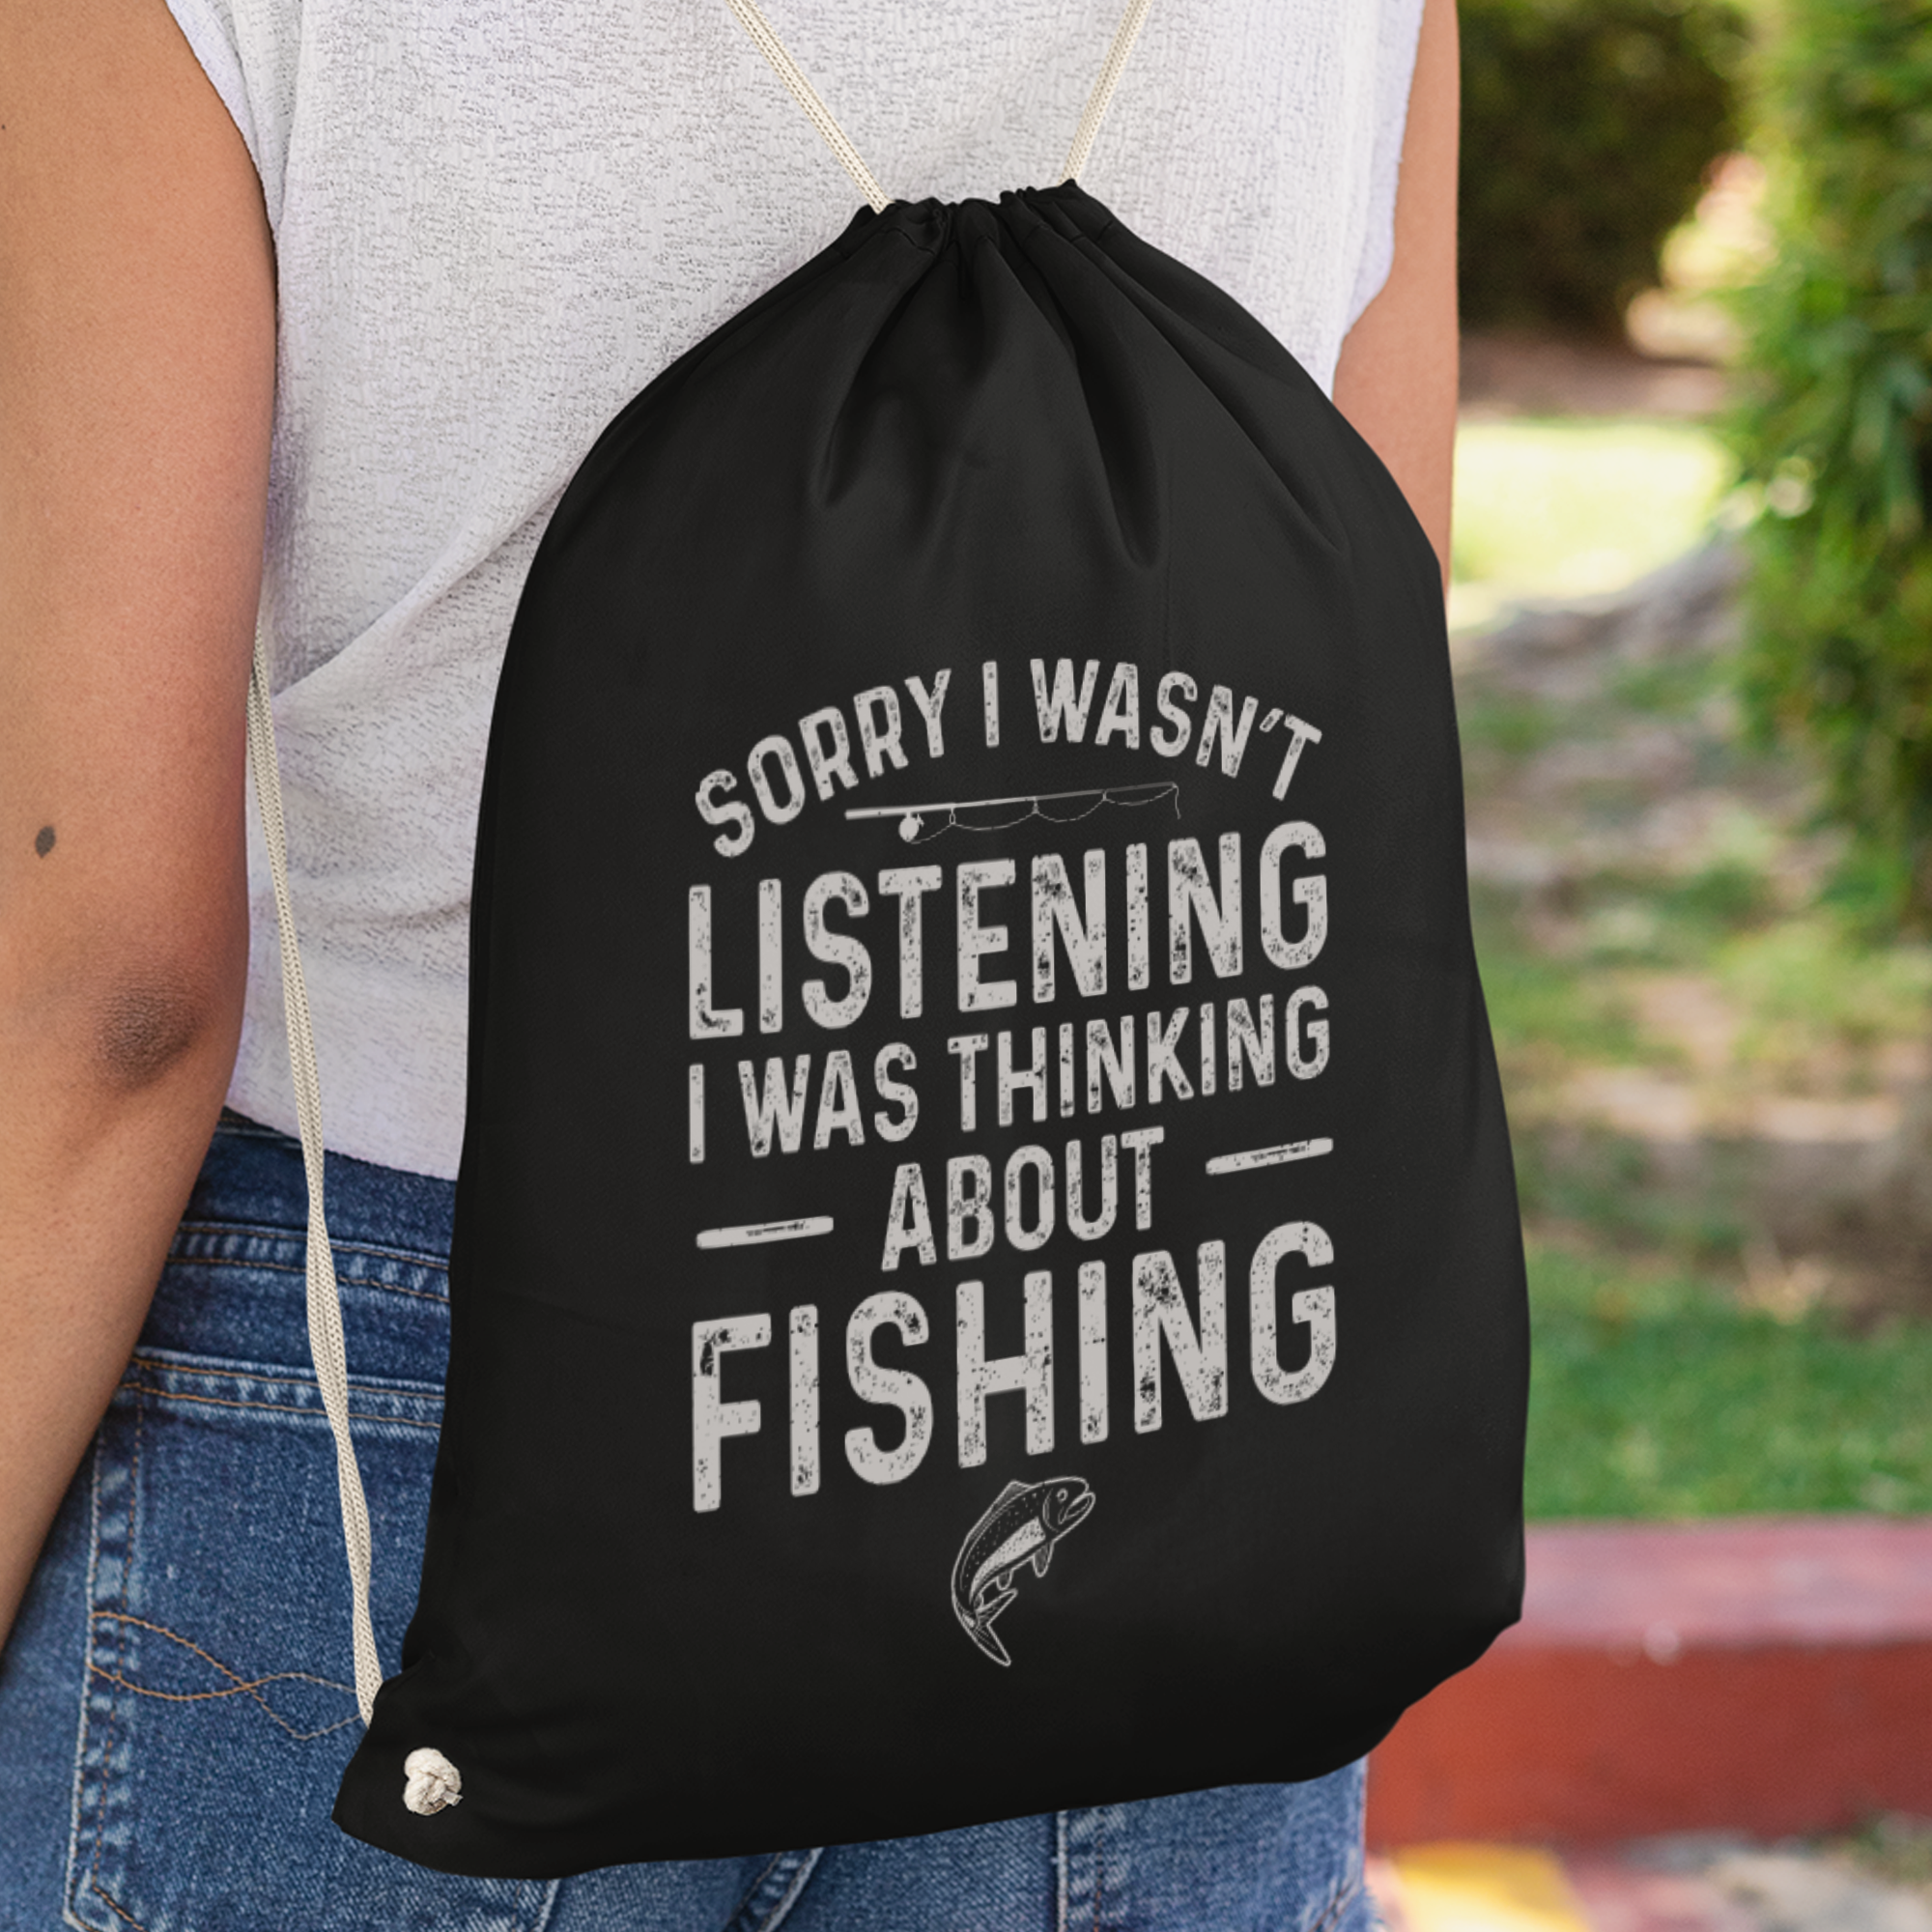 Sorry I Wasn't Listening I Was Thinking About Fishing Turnbeutel - DESIGNSBYJNK5.COM